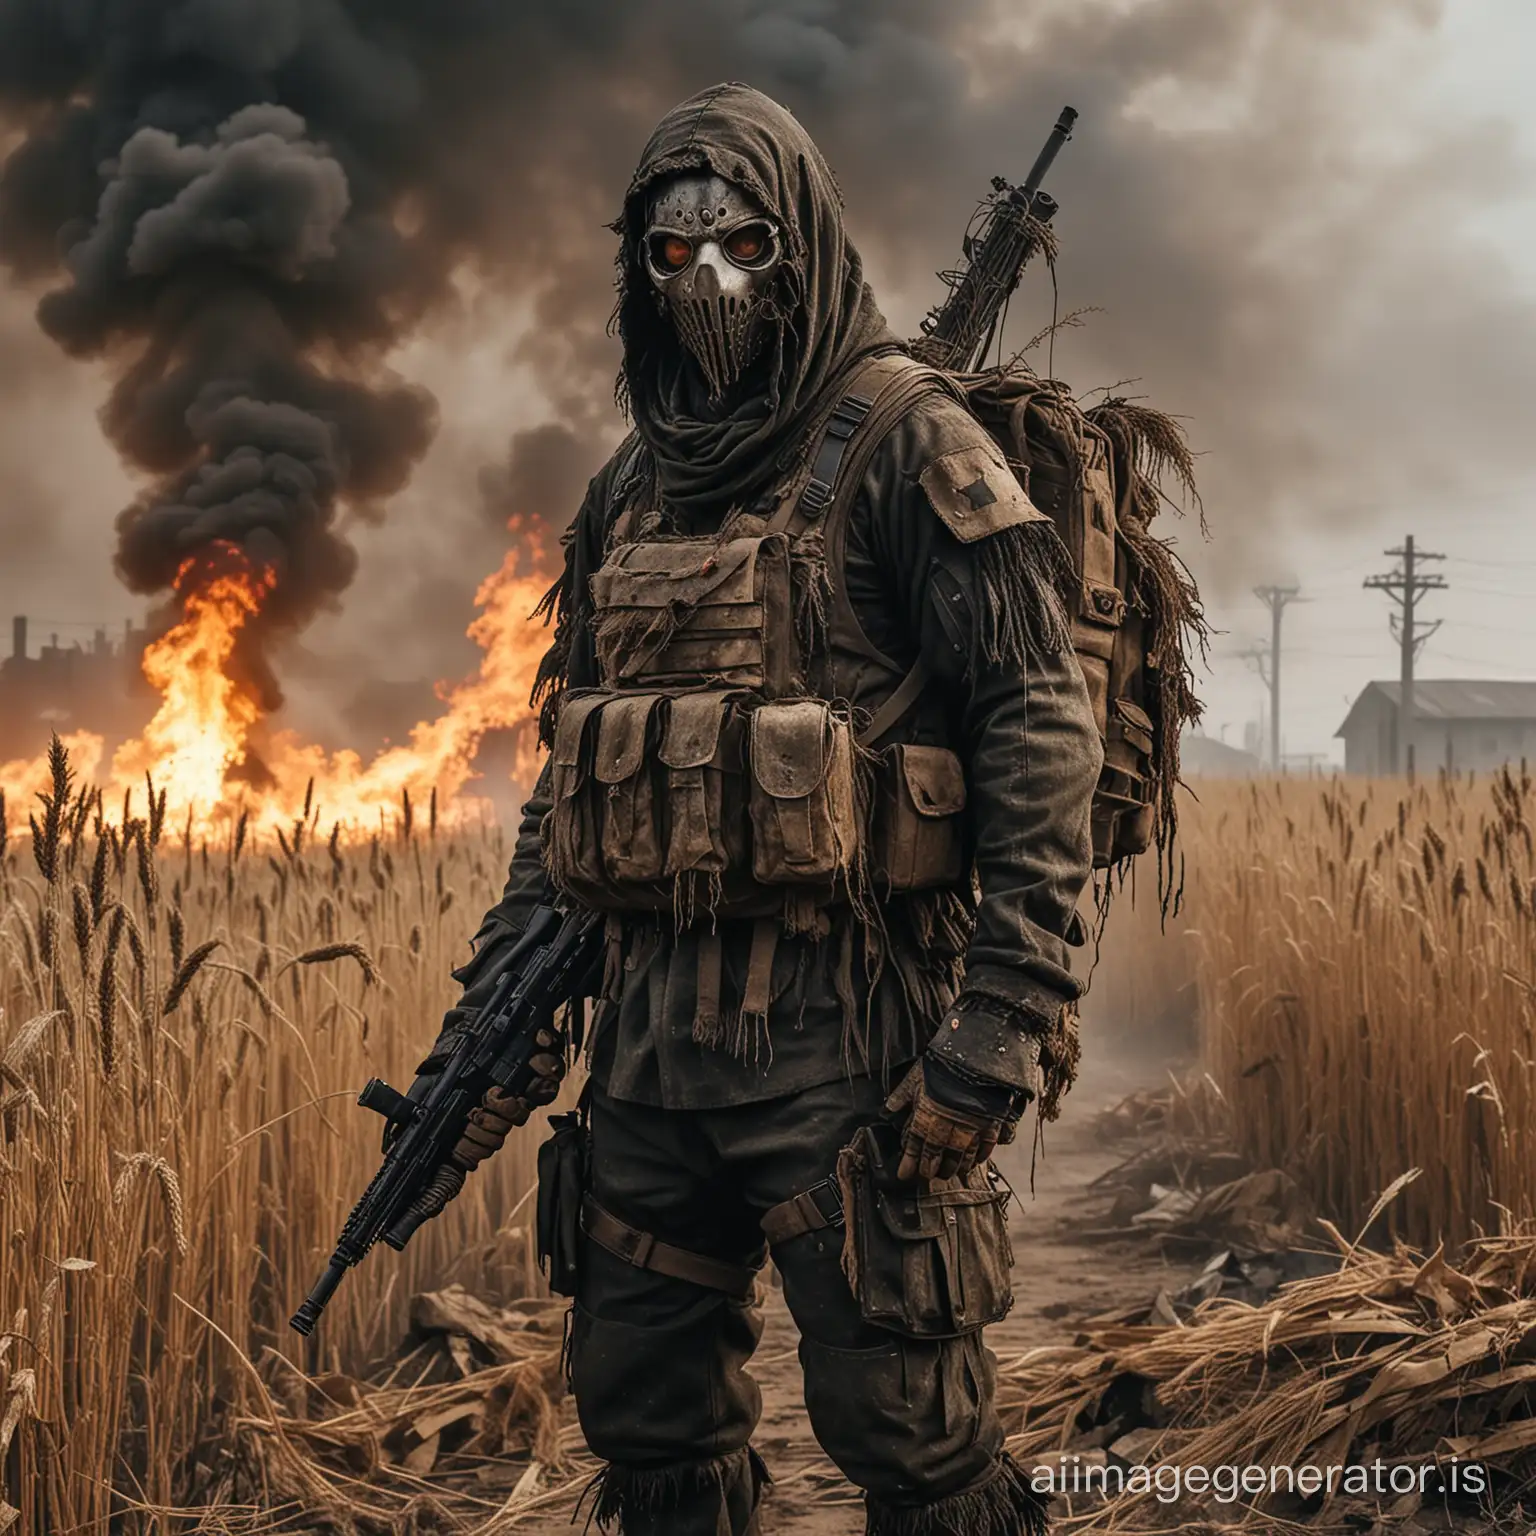 Dark, mysterious, broody, Villainous evil soldier, with a scarecrow-styled mask, burning eyes with smoke and flames, wearing a tattered ghillie suit and body armor, carrying a backpack and holding an assault rifle, standing in a post-apocalyptic wasteland, which used to be a wheat farm